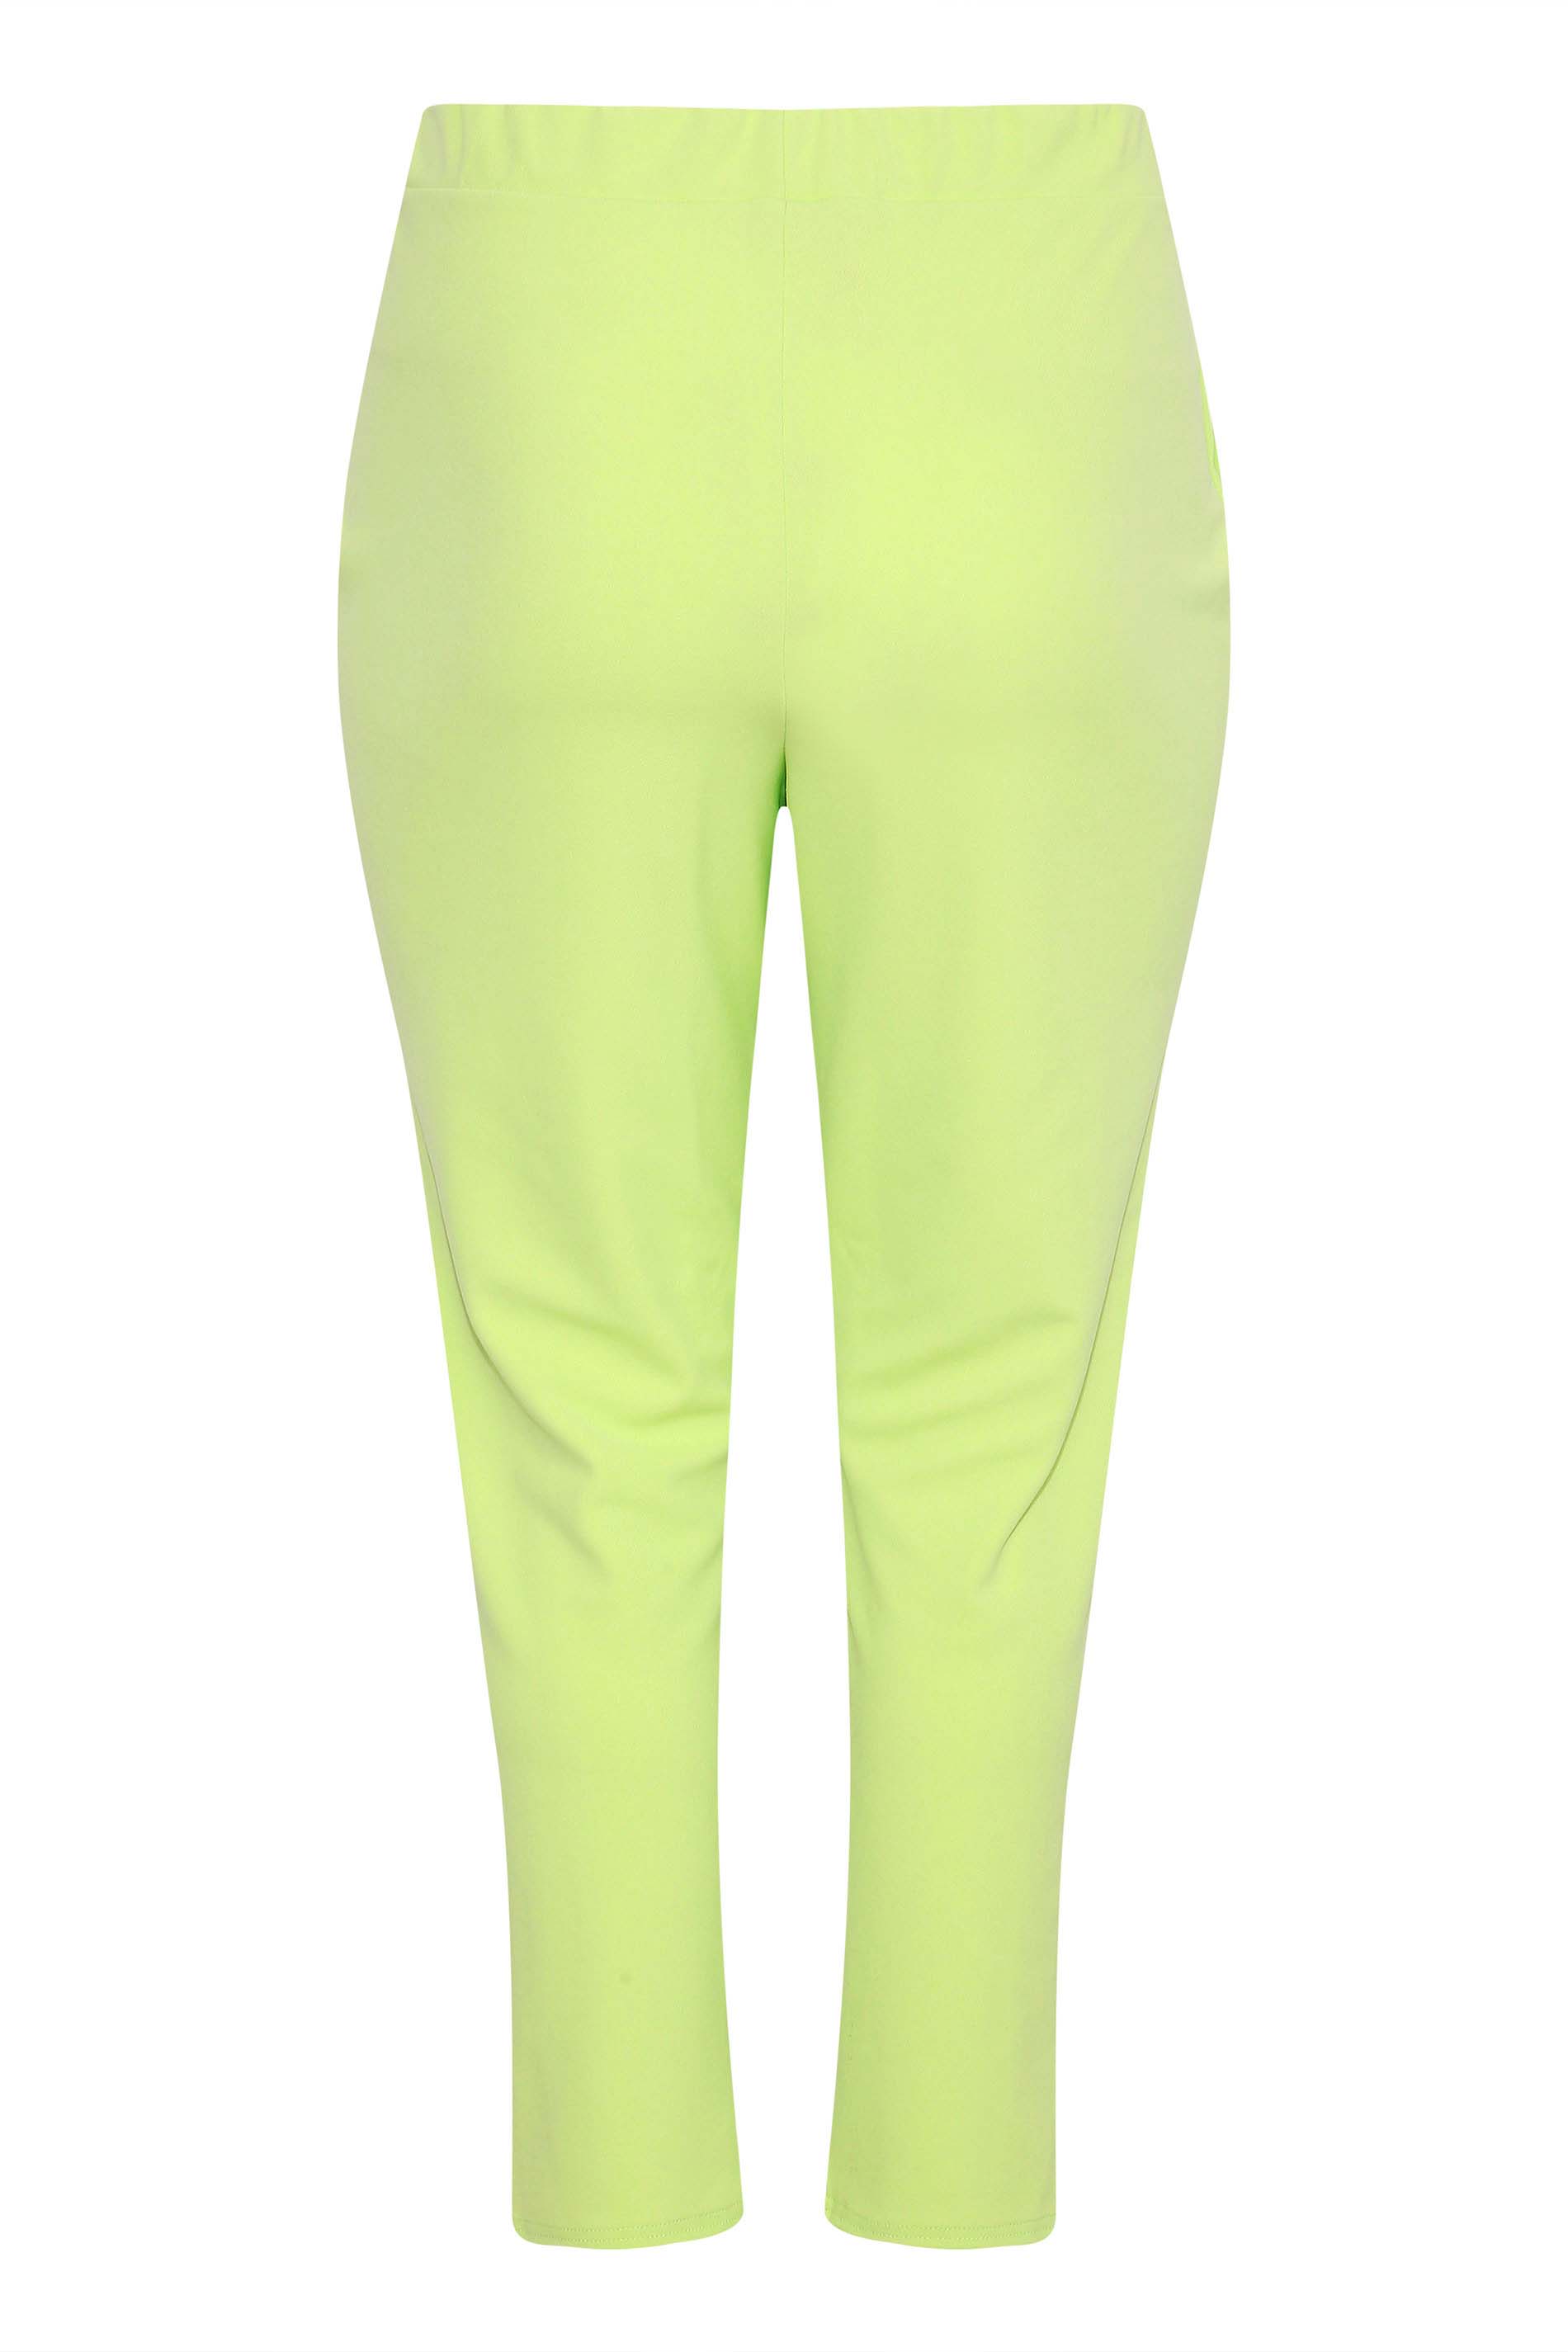 LIMITED COLLECTION Plus Size Lime Green Split Hem Stretch Tapered 